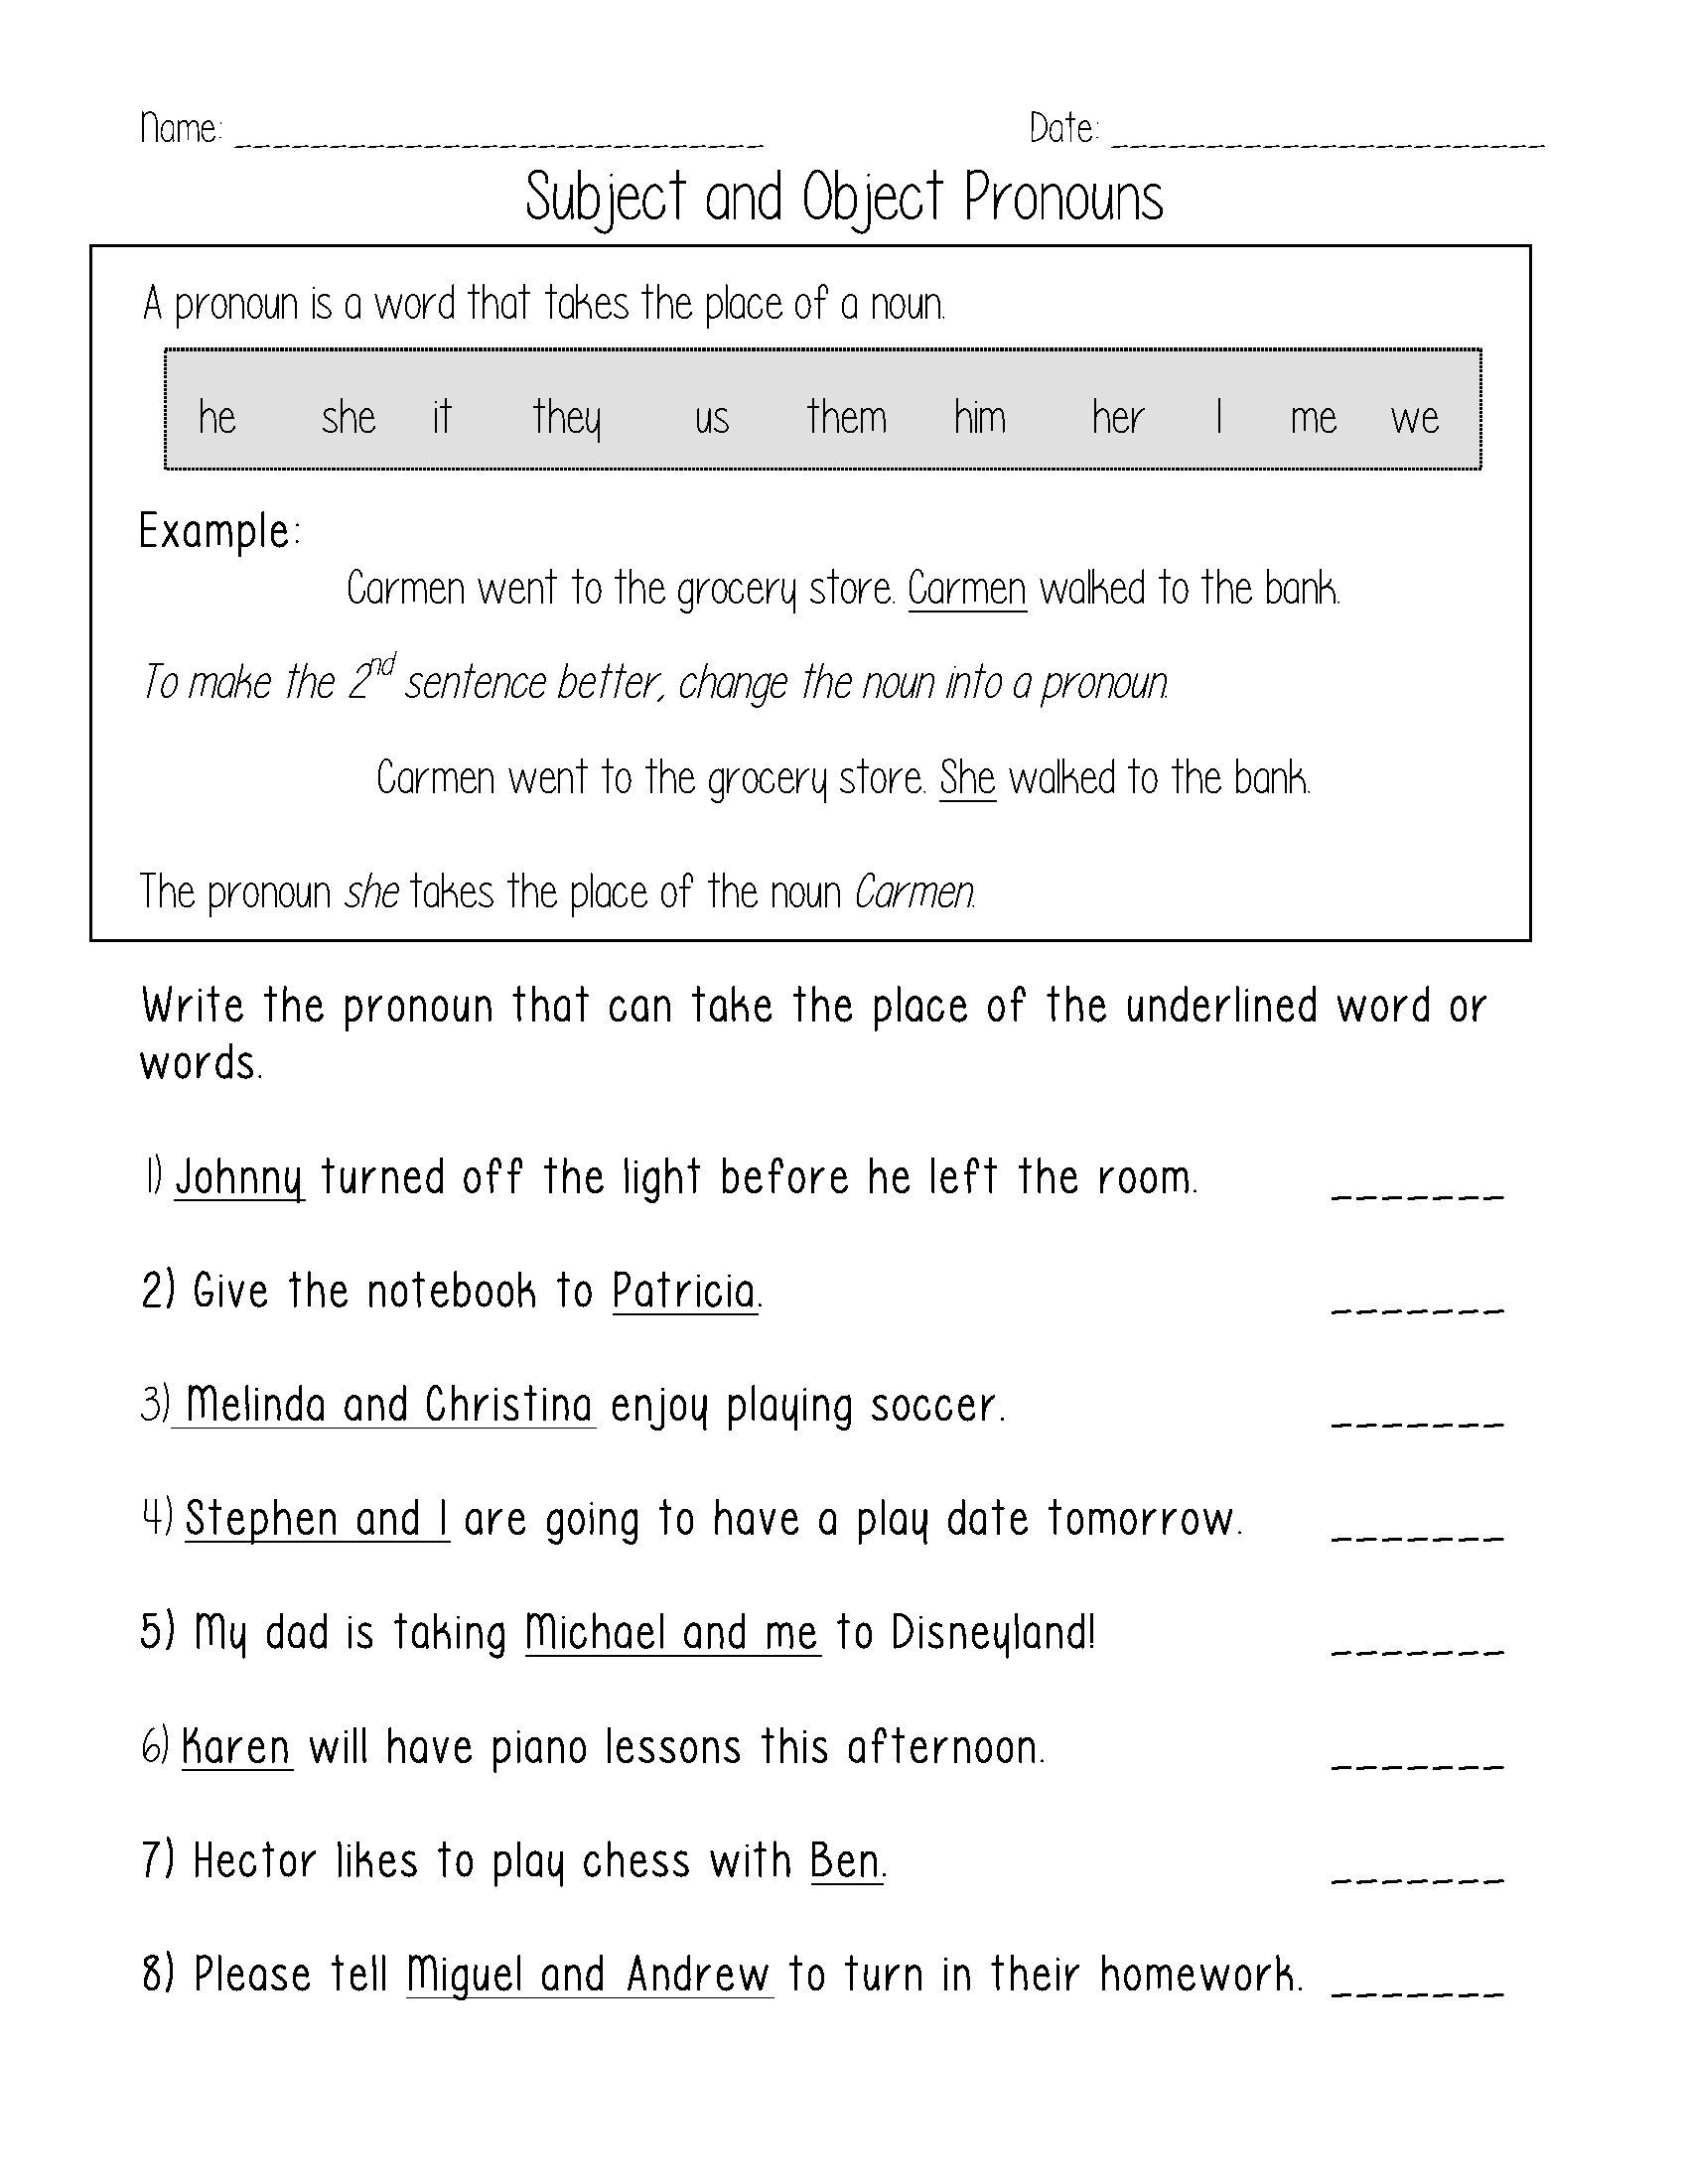 Pronoun Worksheets for 2nd Grade 2nd Grade Esl Worksheet Valid Subject and Object Pronouns